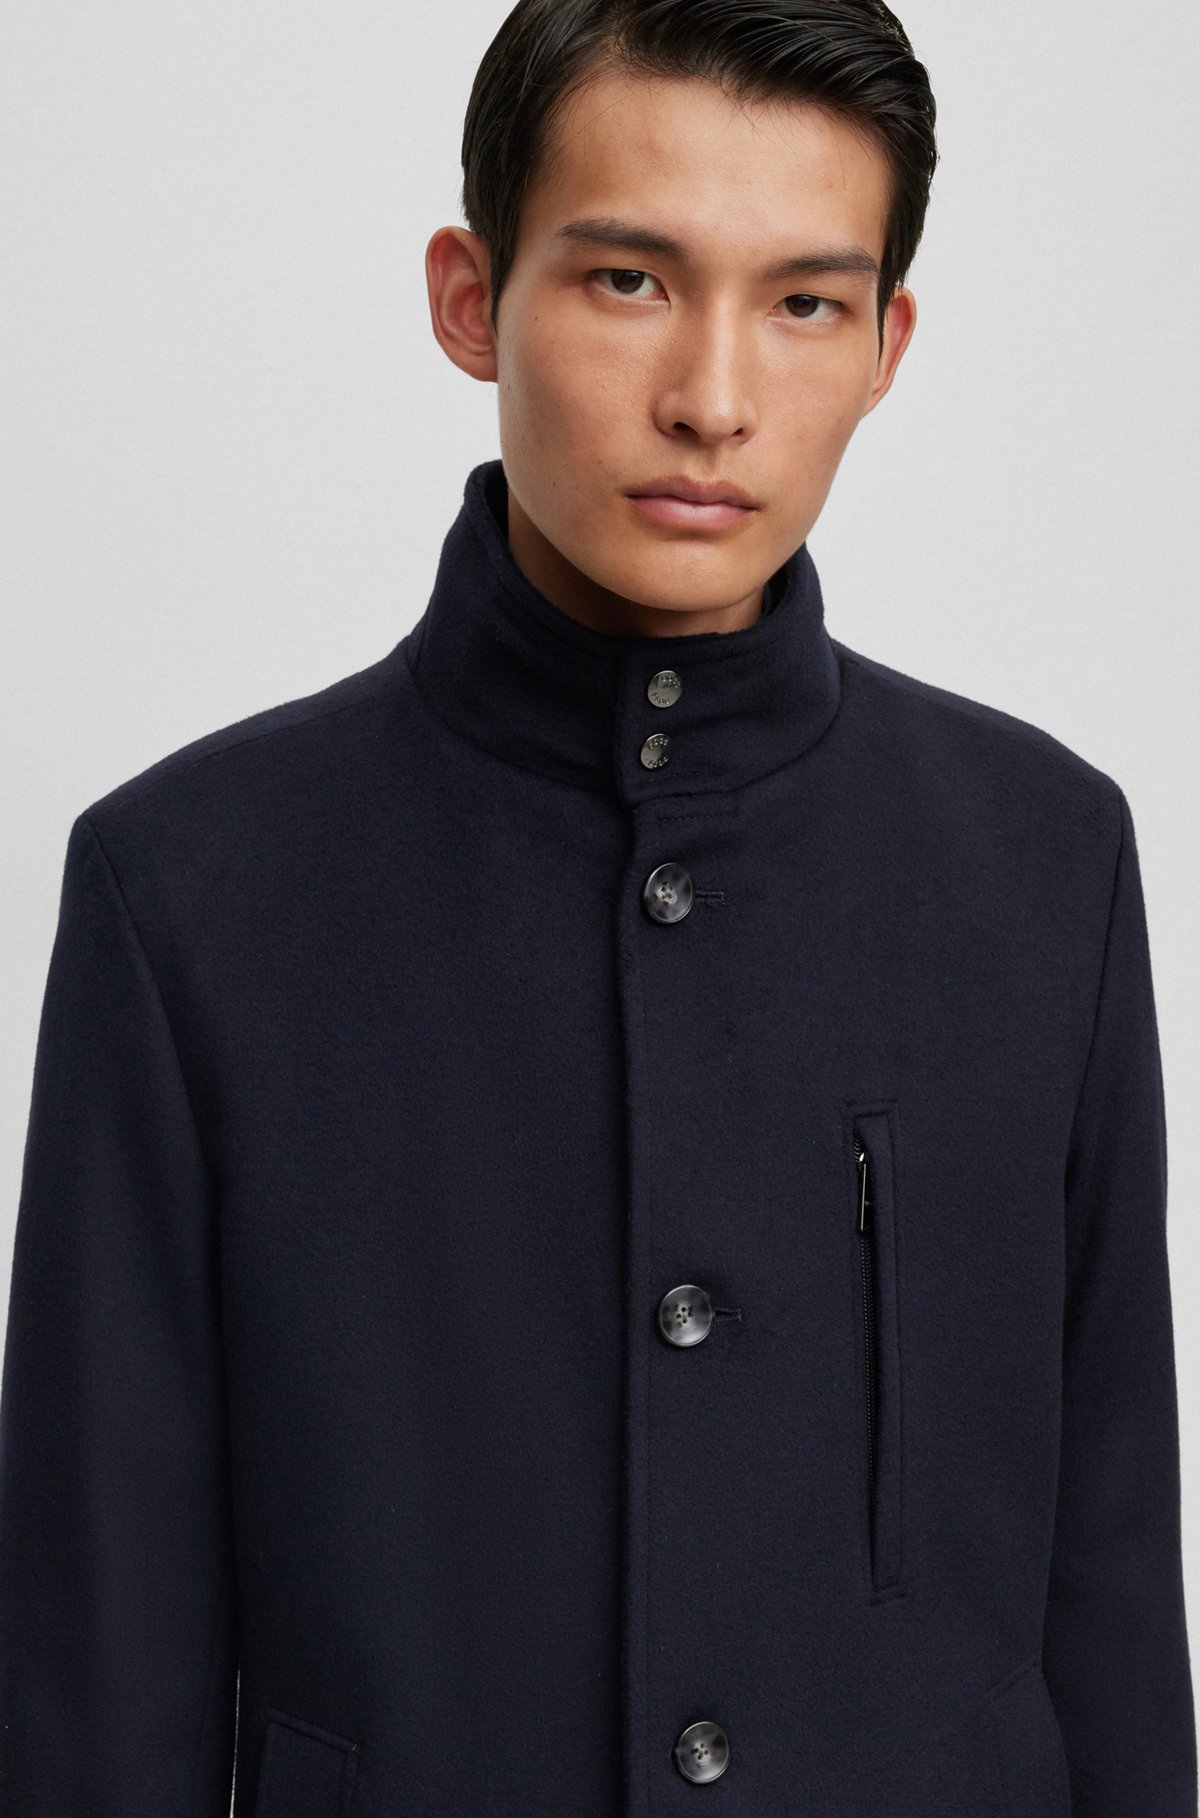 BOSS - Slim-fit formal coat in virgin wool and cashmere